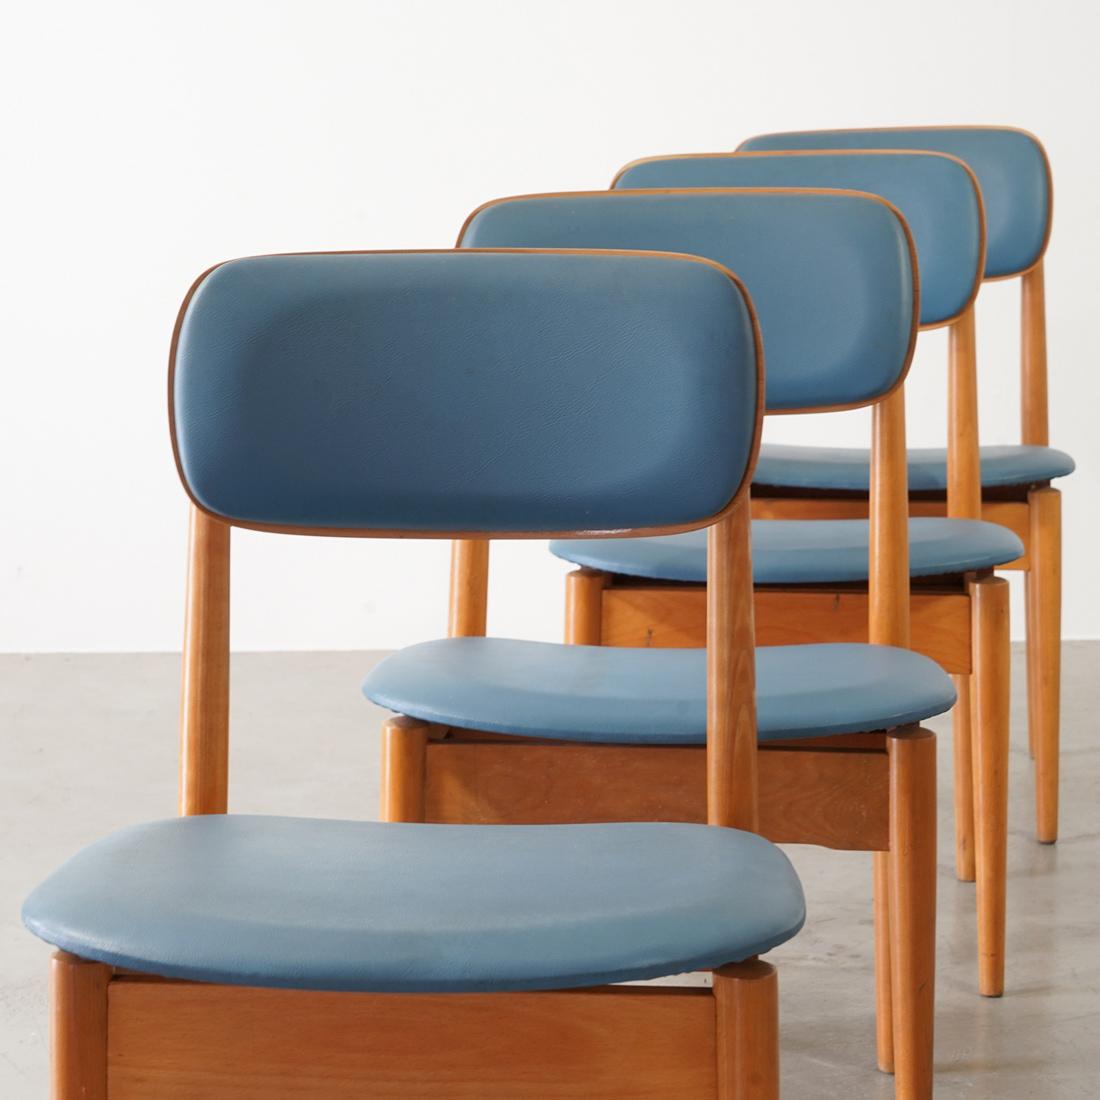 The original mid-century chair set was manufactured in the fifties by Fritz Emme Möbelfabrikation in Bad Pyrmont Germany. The chairs are very stable, have a classic, simple shape and only slight signs of wear. The upholstery is firm and the